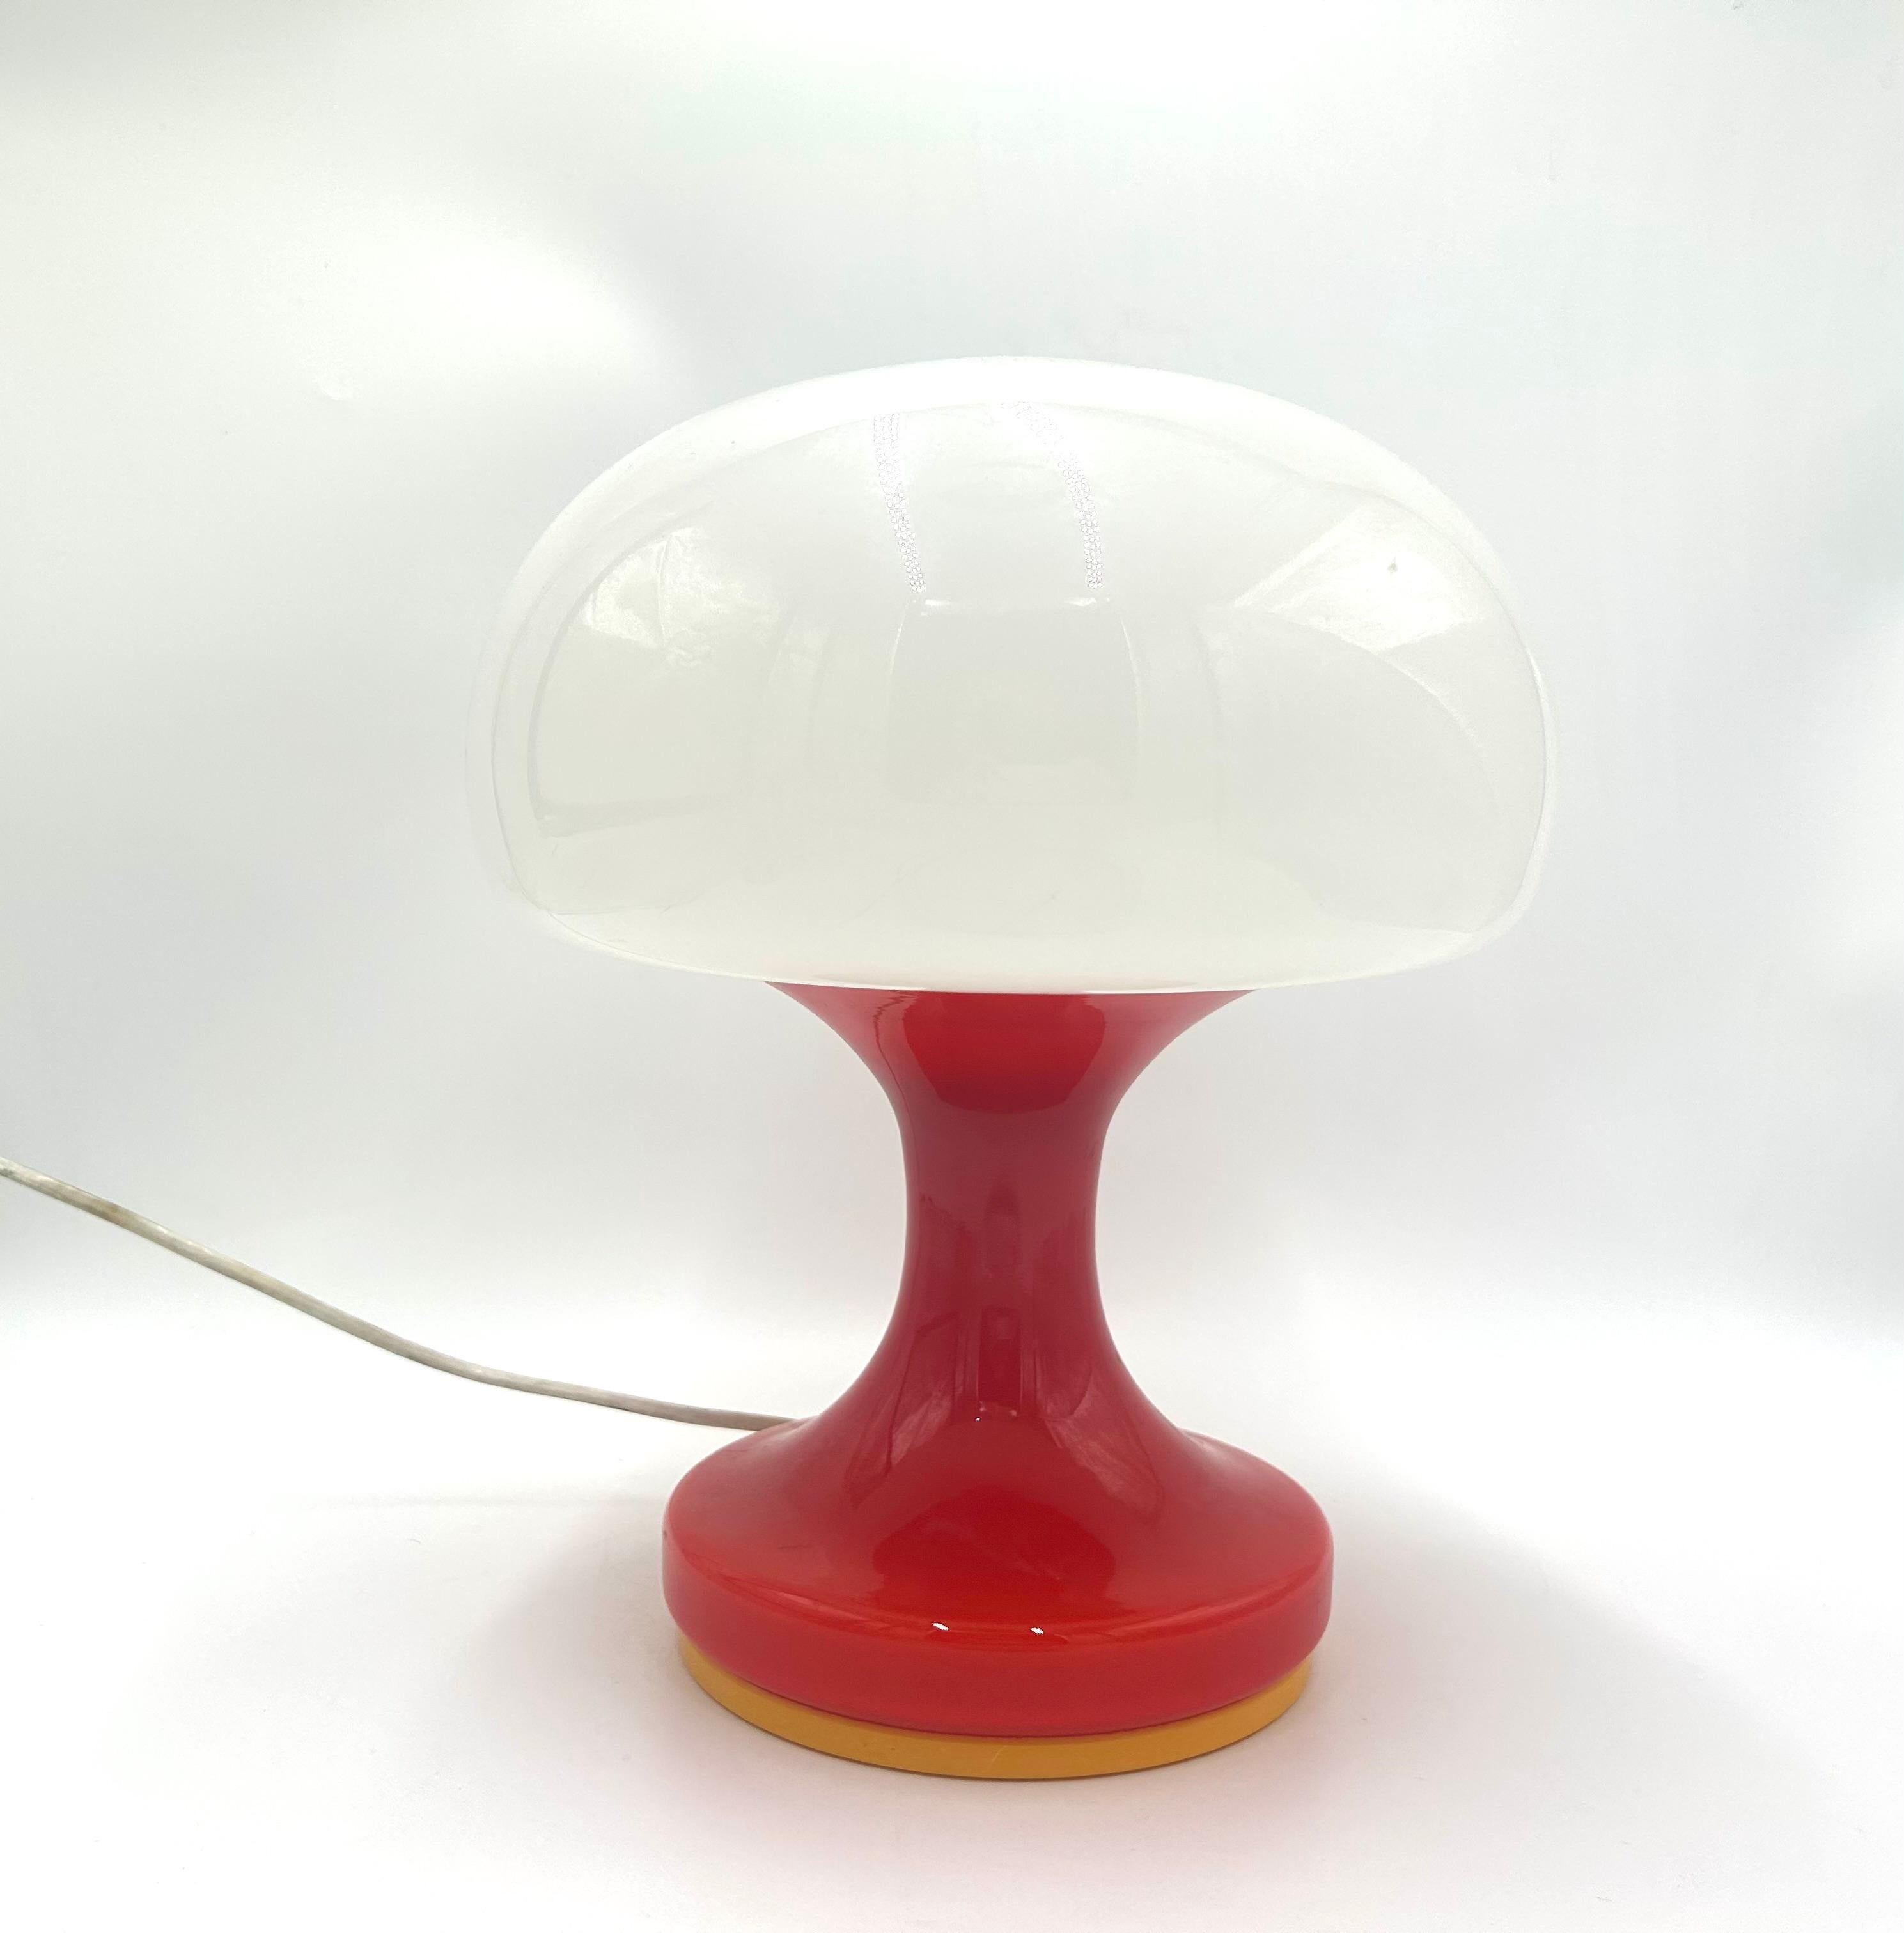 Czech Mid-Century Modern Table Lamp, S. Tabera, 1970s For Sale